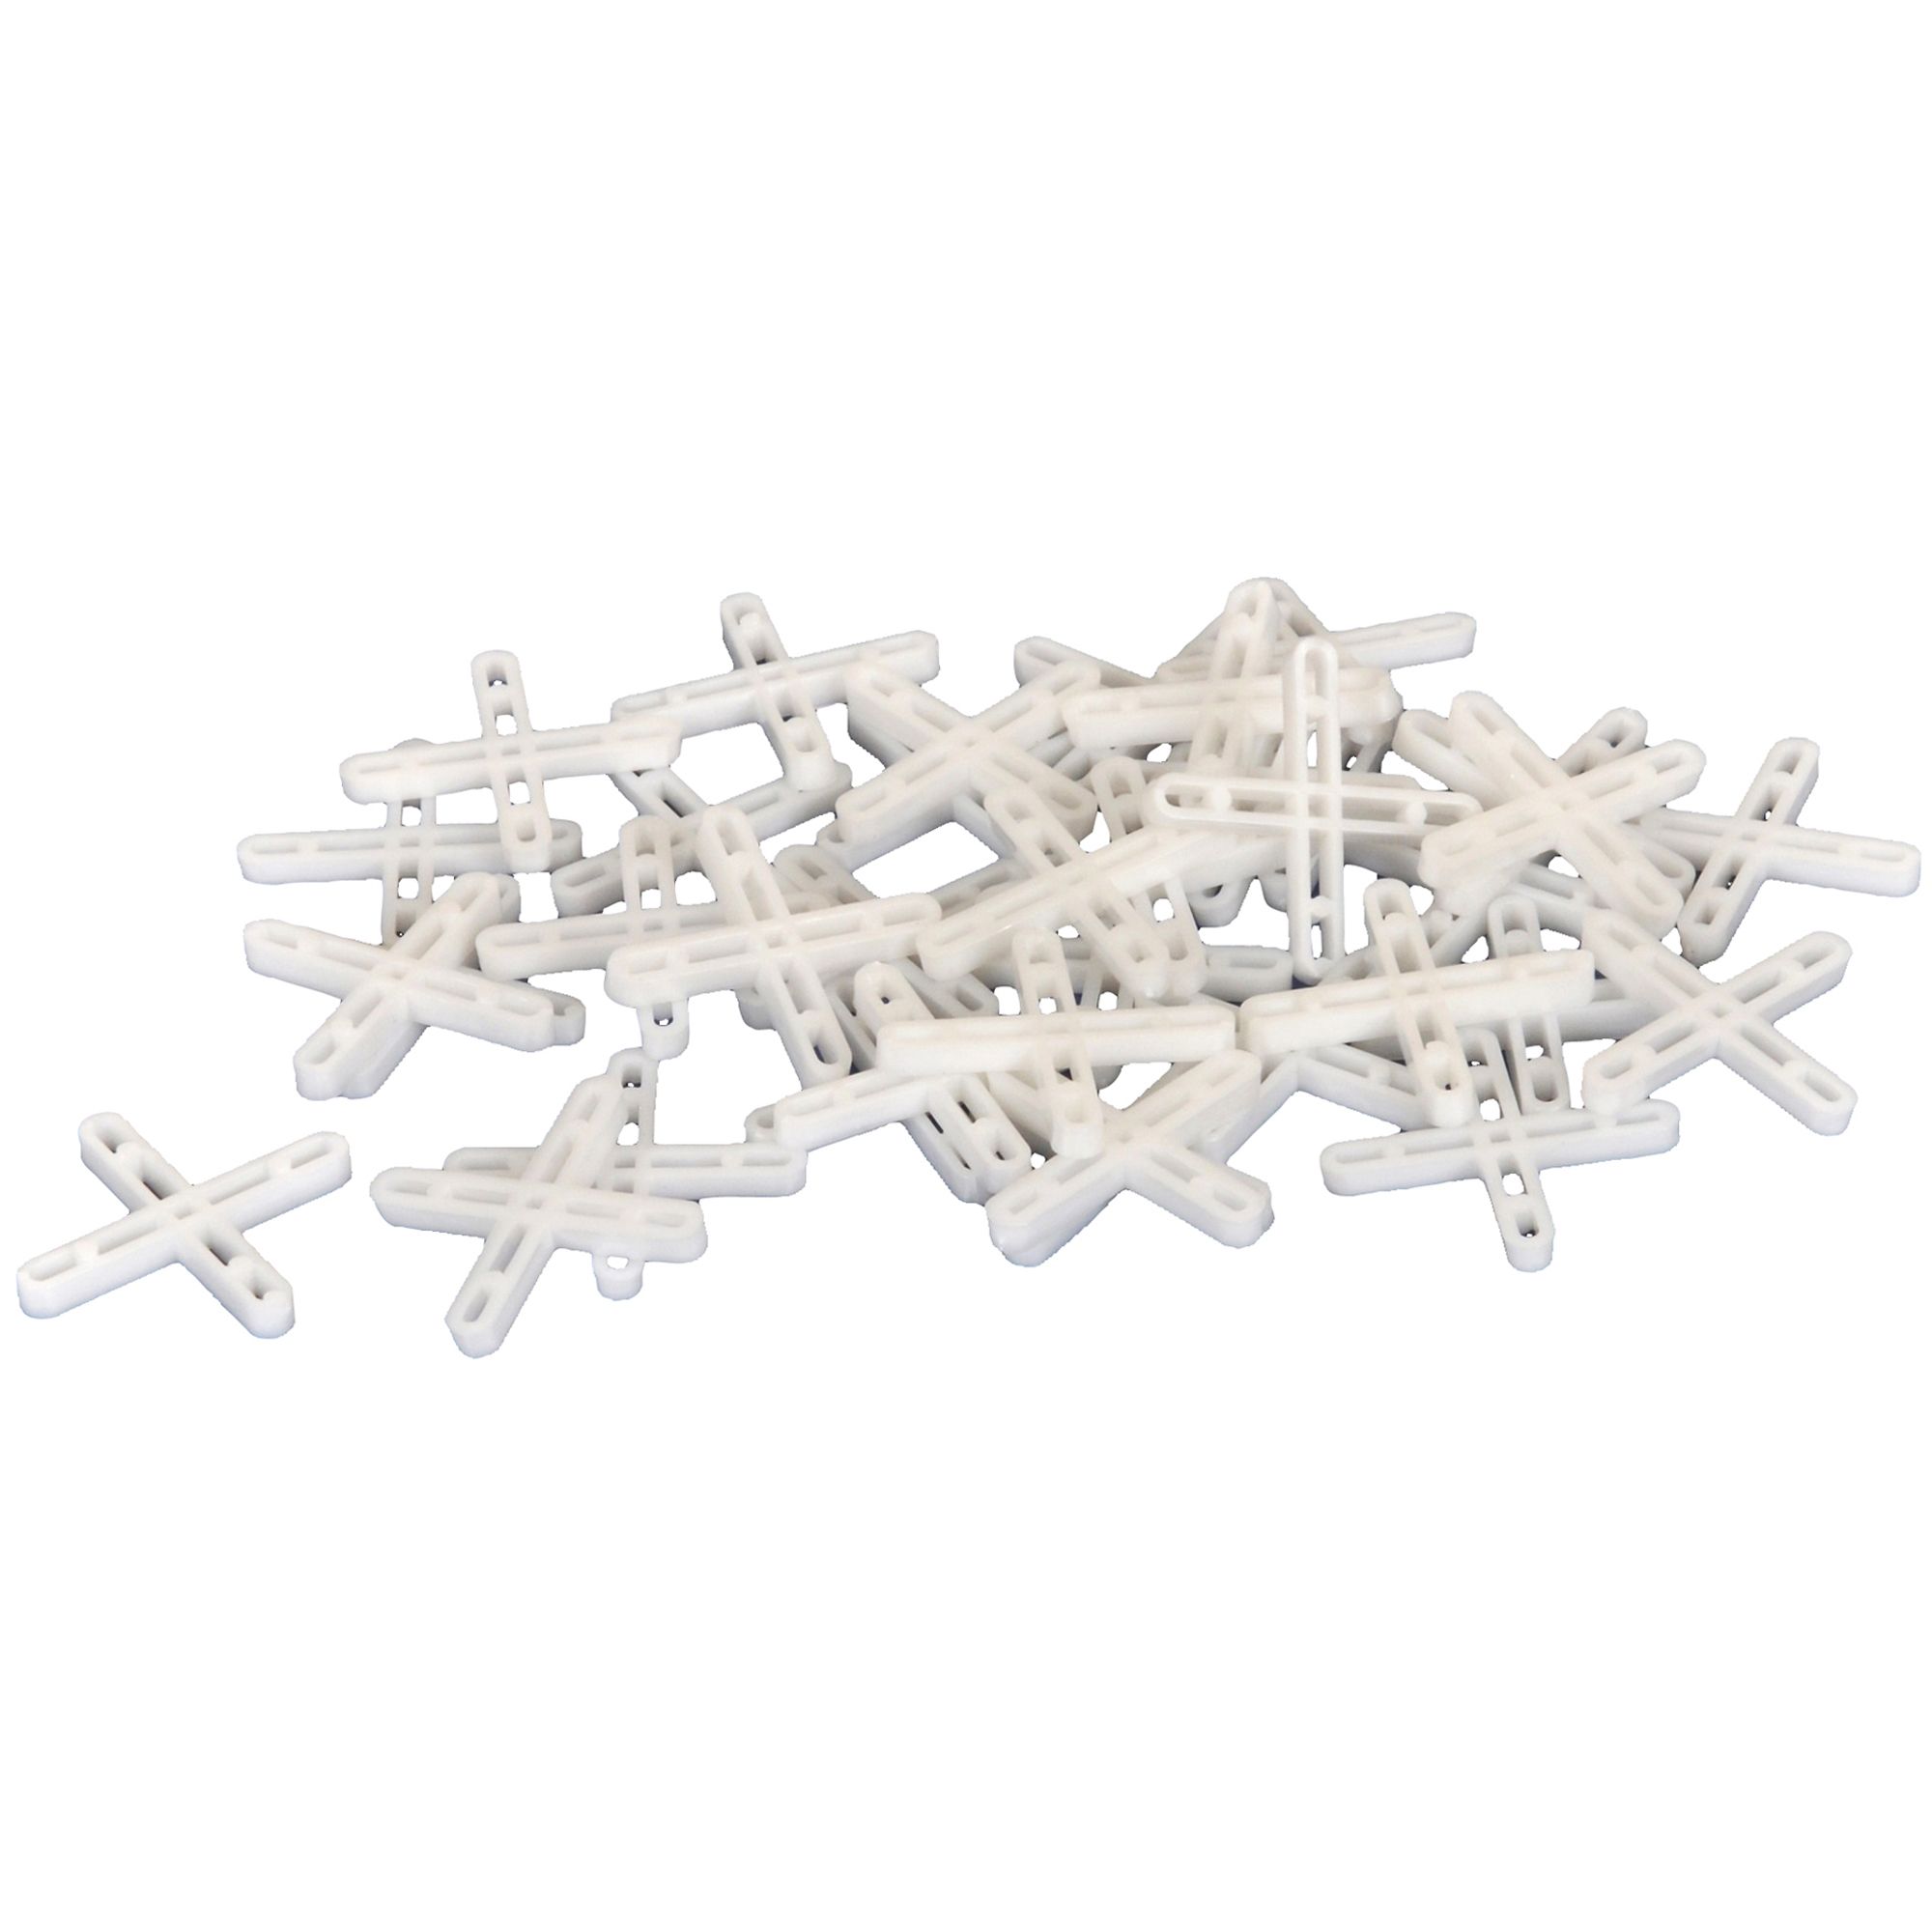 Diall 4mm Tile spacer, Pack of 350